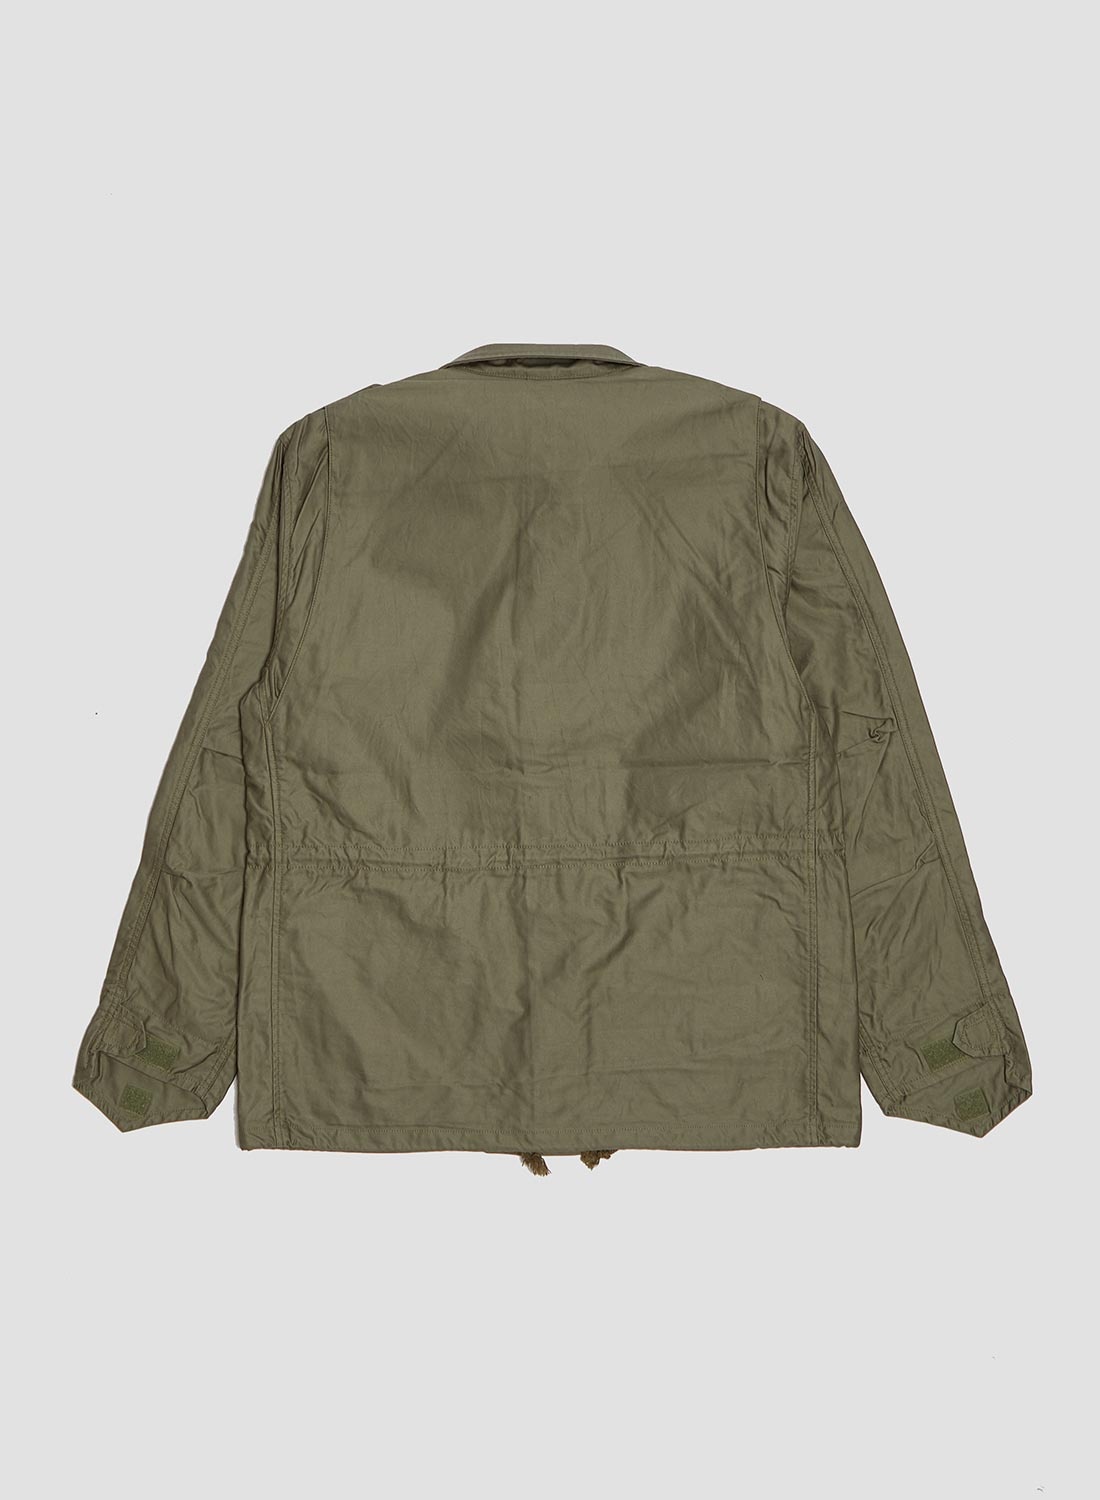 FOB Factory M-65 Field Jacket Olive - 8